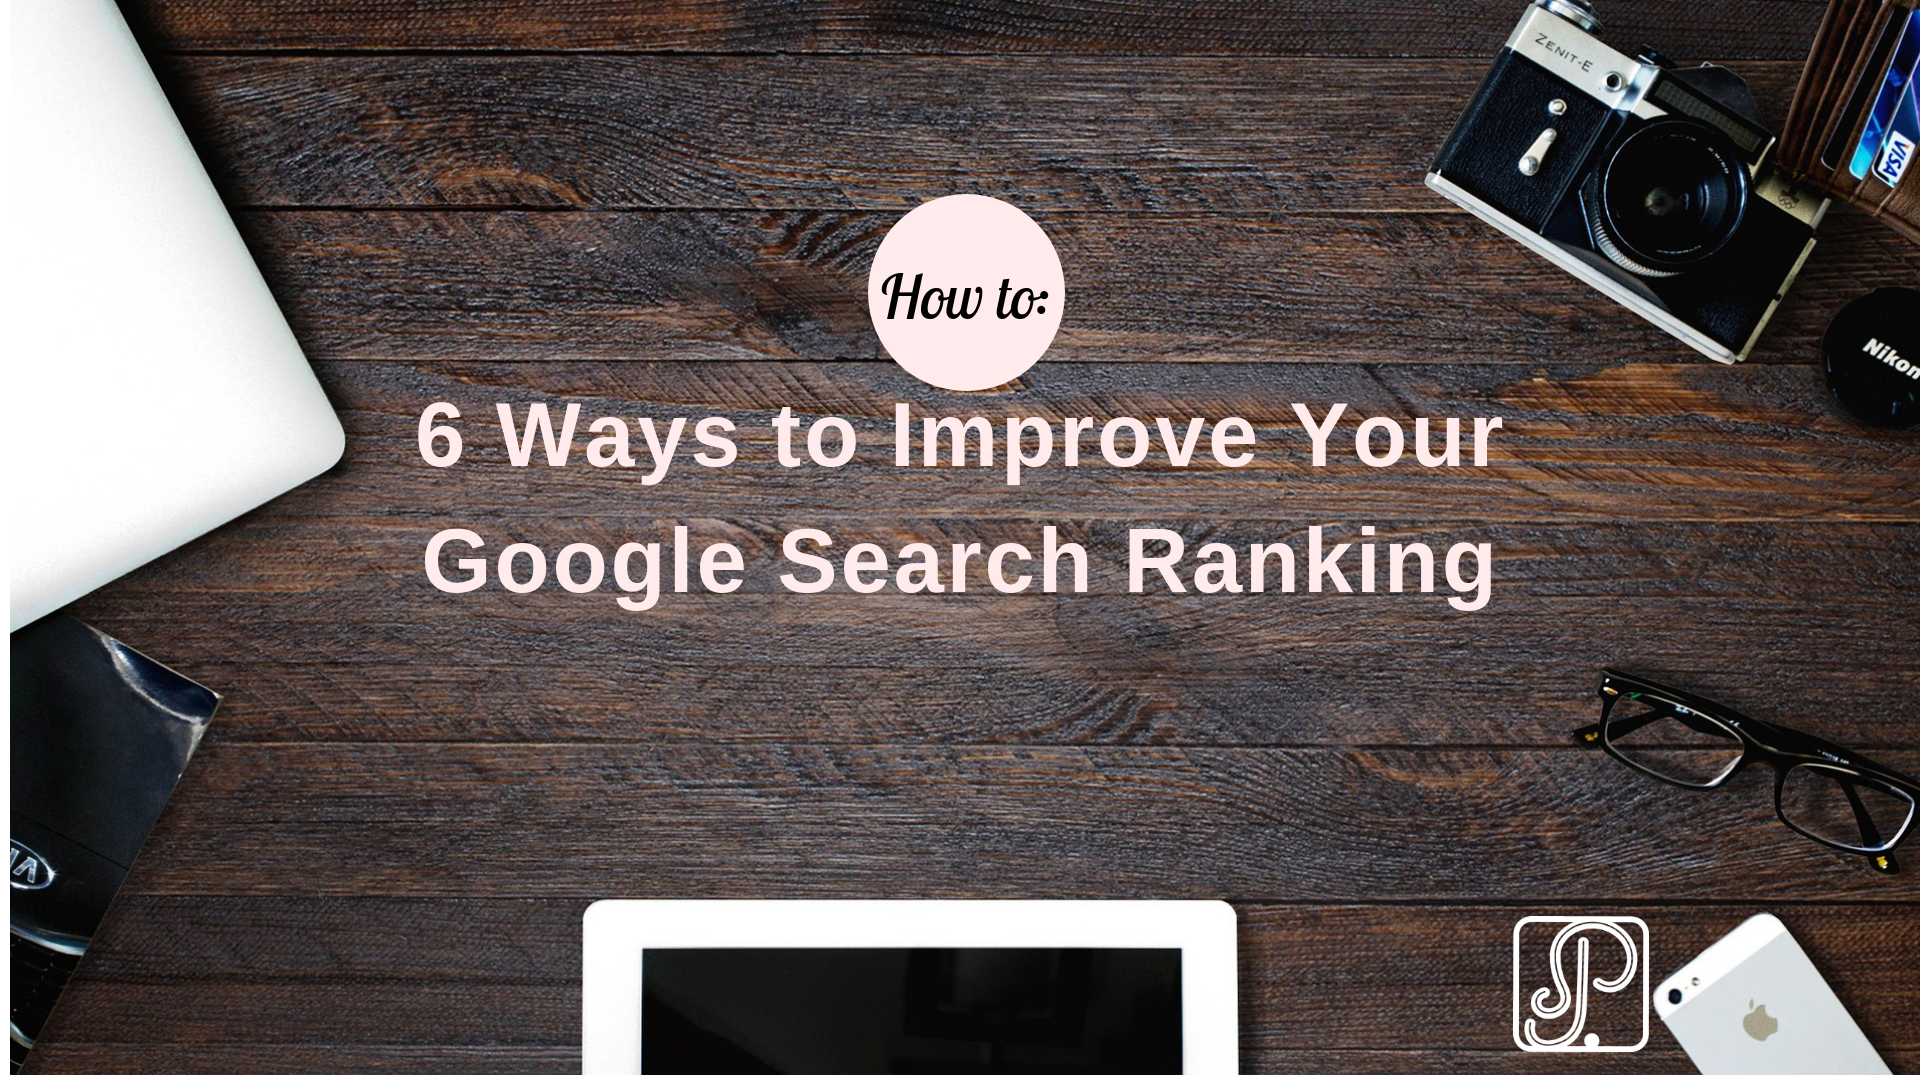 How to Improve Your Google Search Ranking